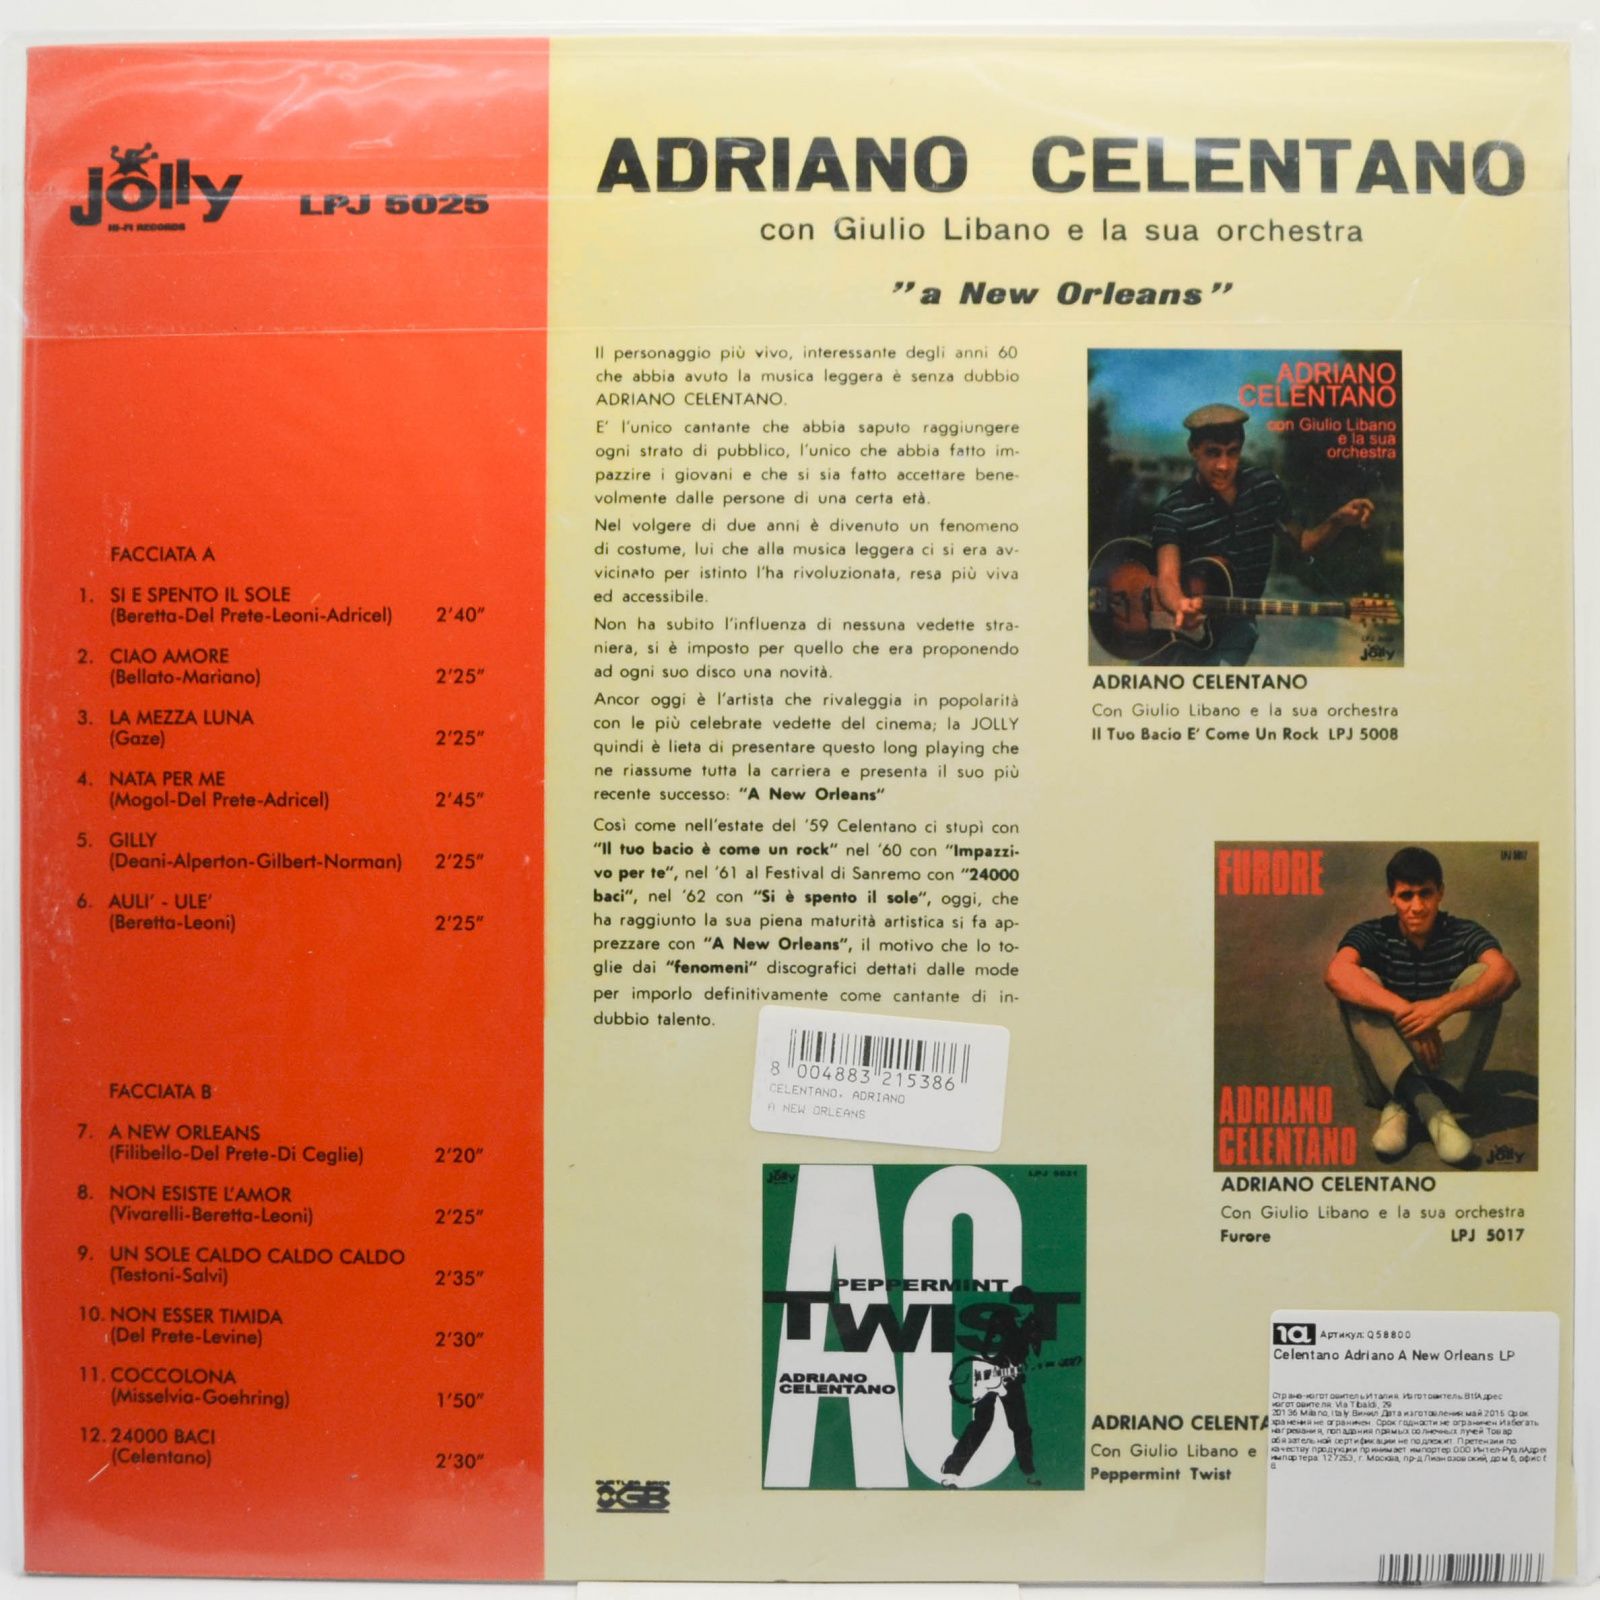 Adriano Celentano — A New Orleans (Italy), 1963